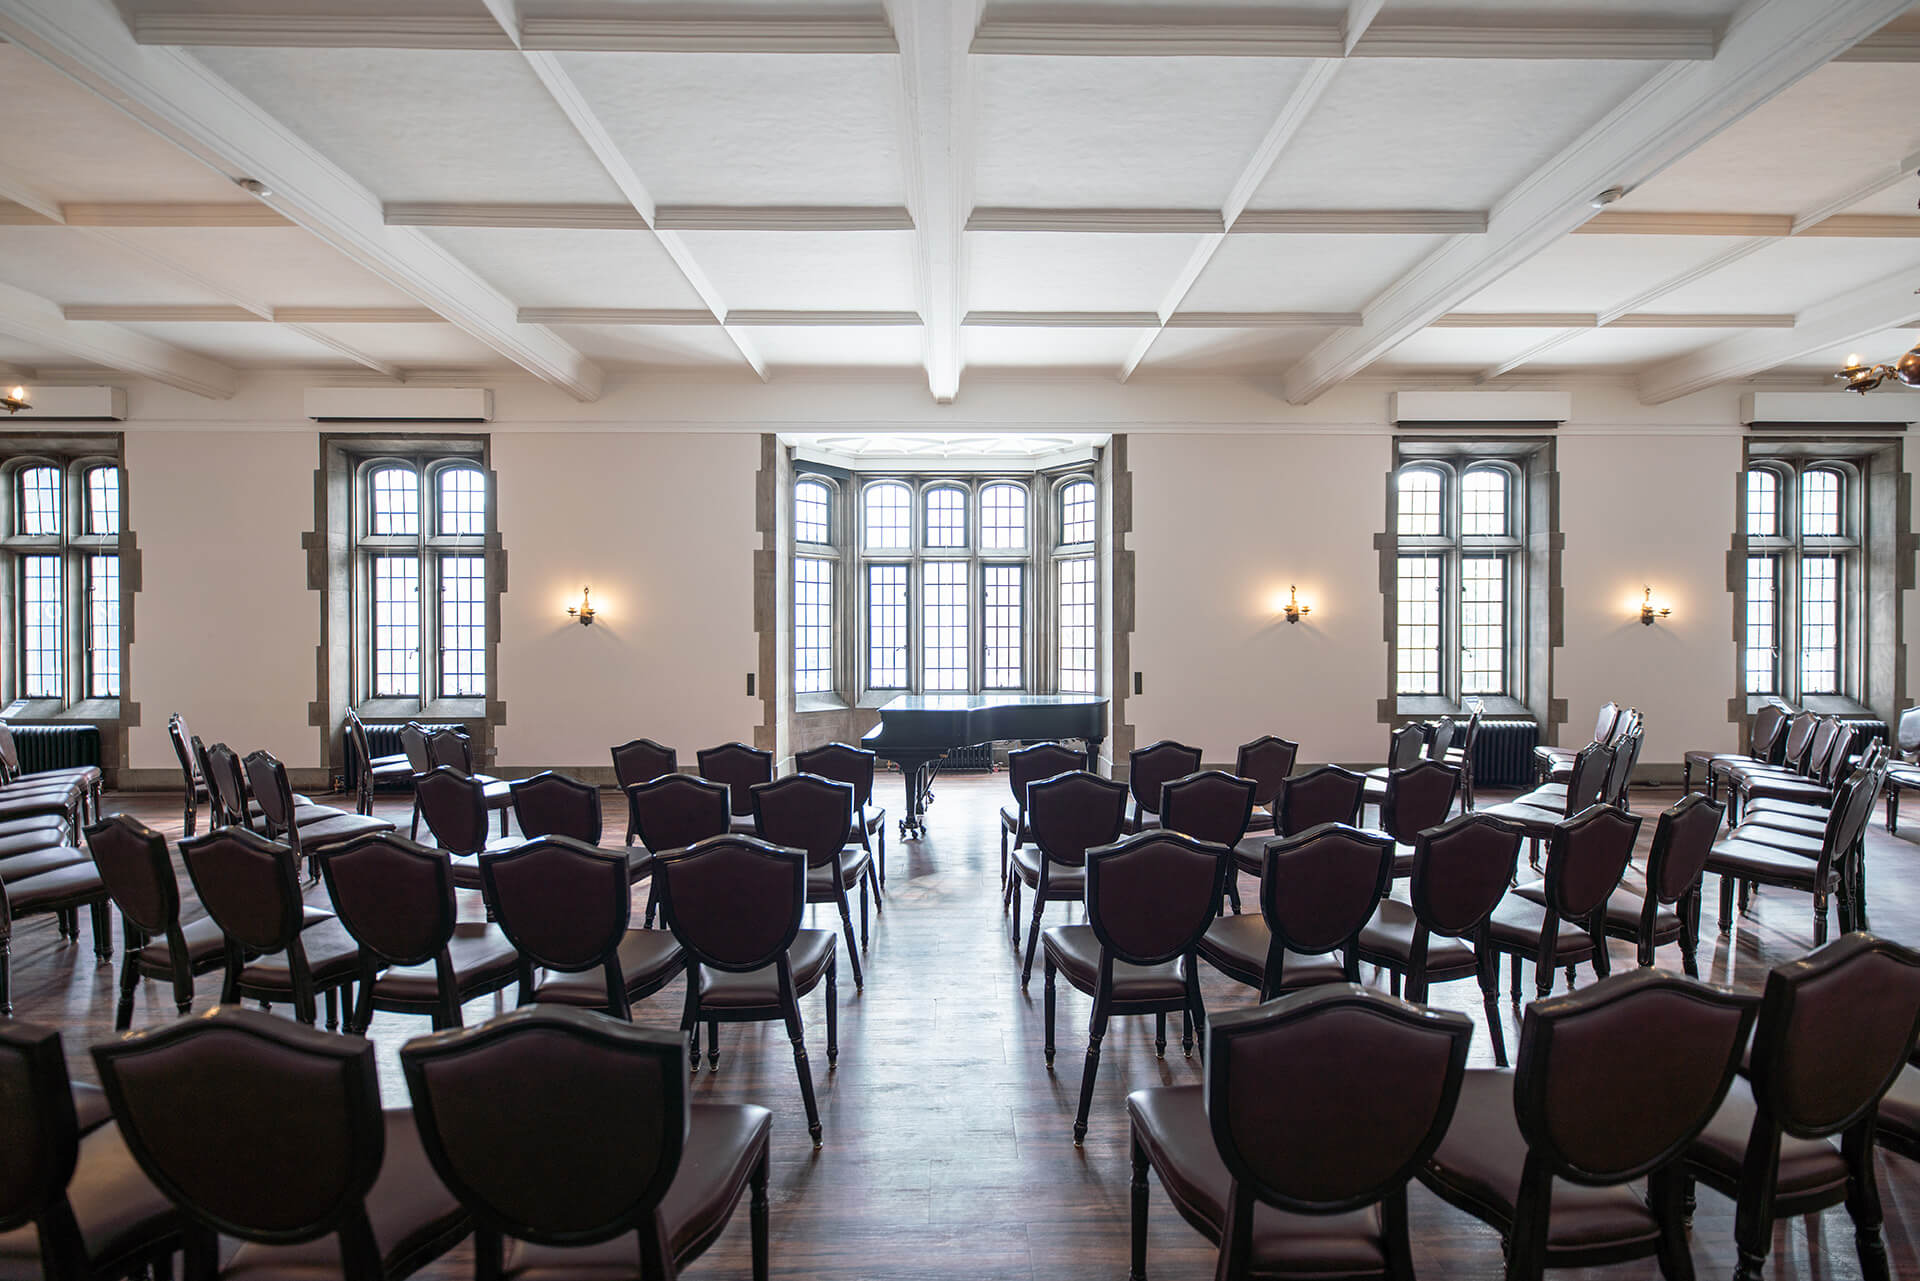 A large room with hardwood floors, gothic windows and seating arranged for an event